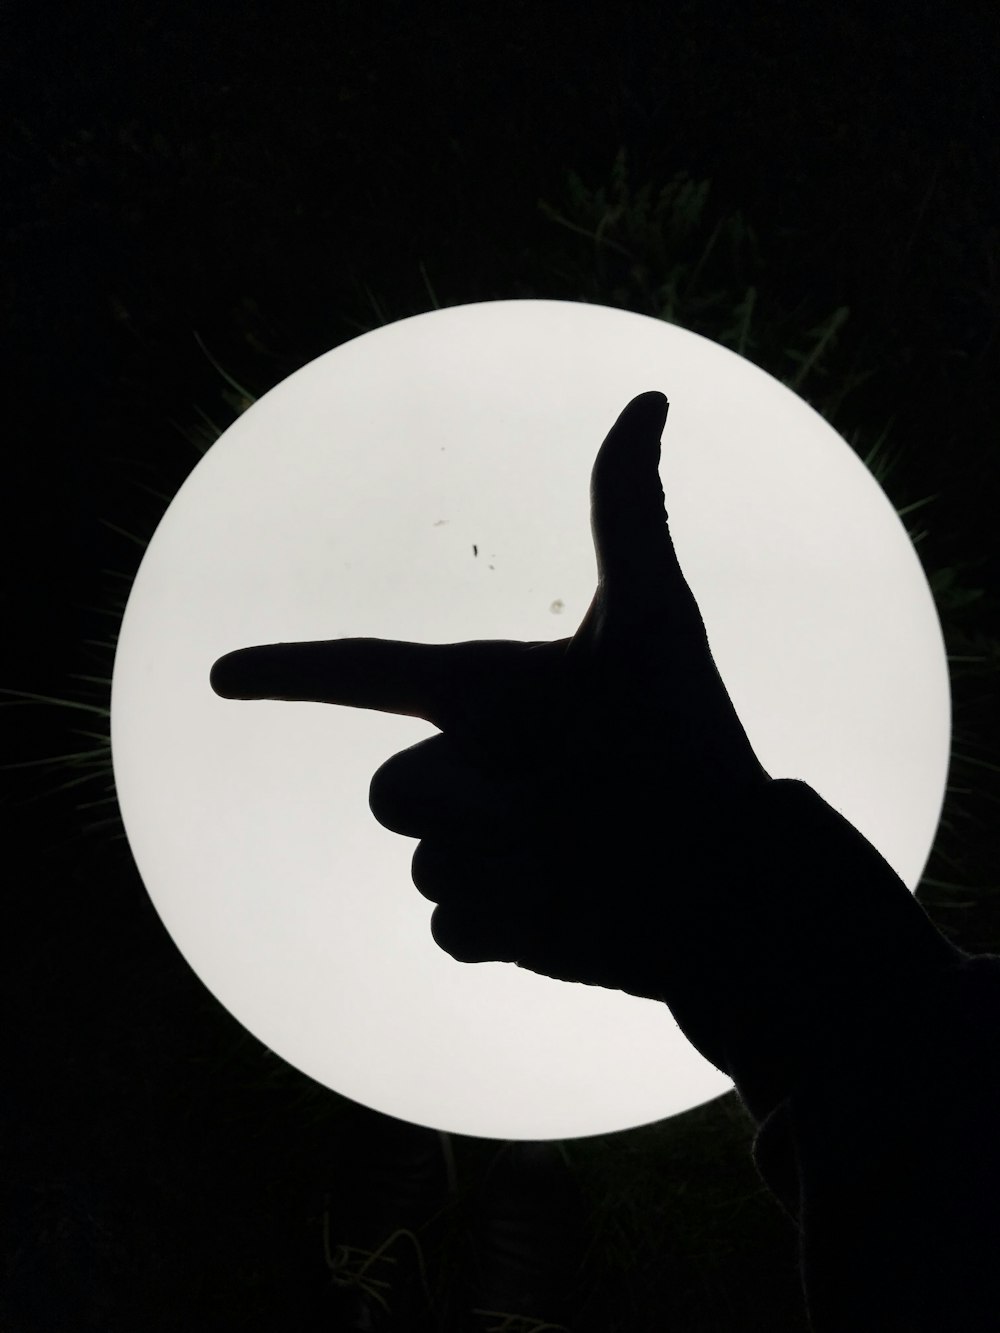 person showing hand gesture